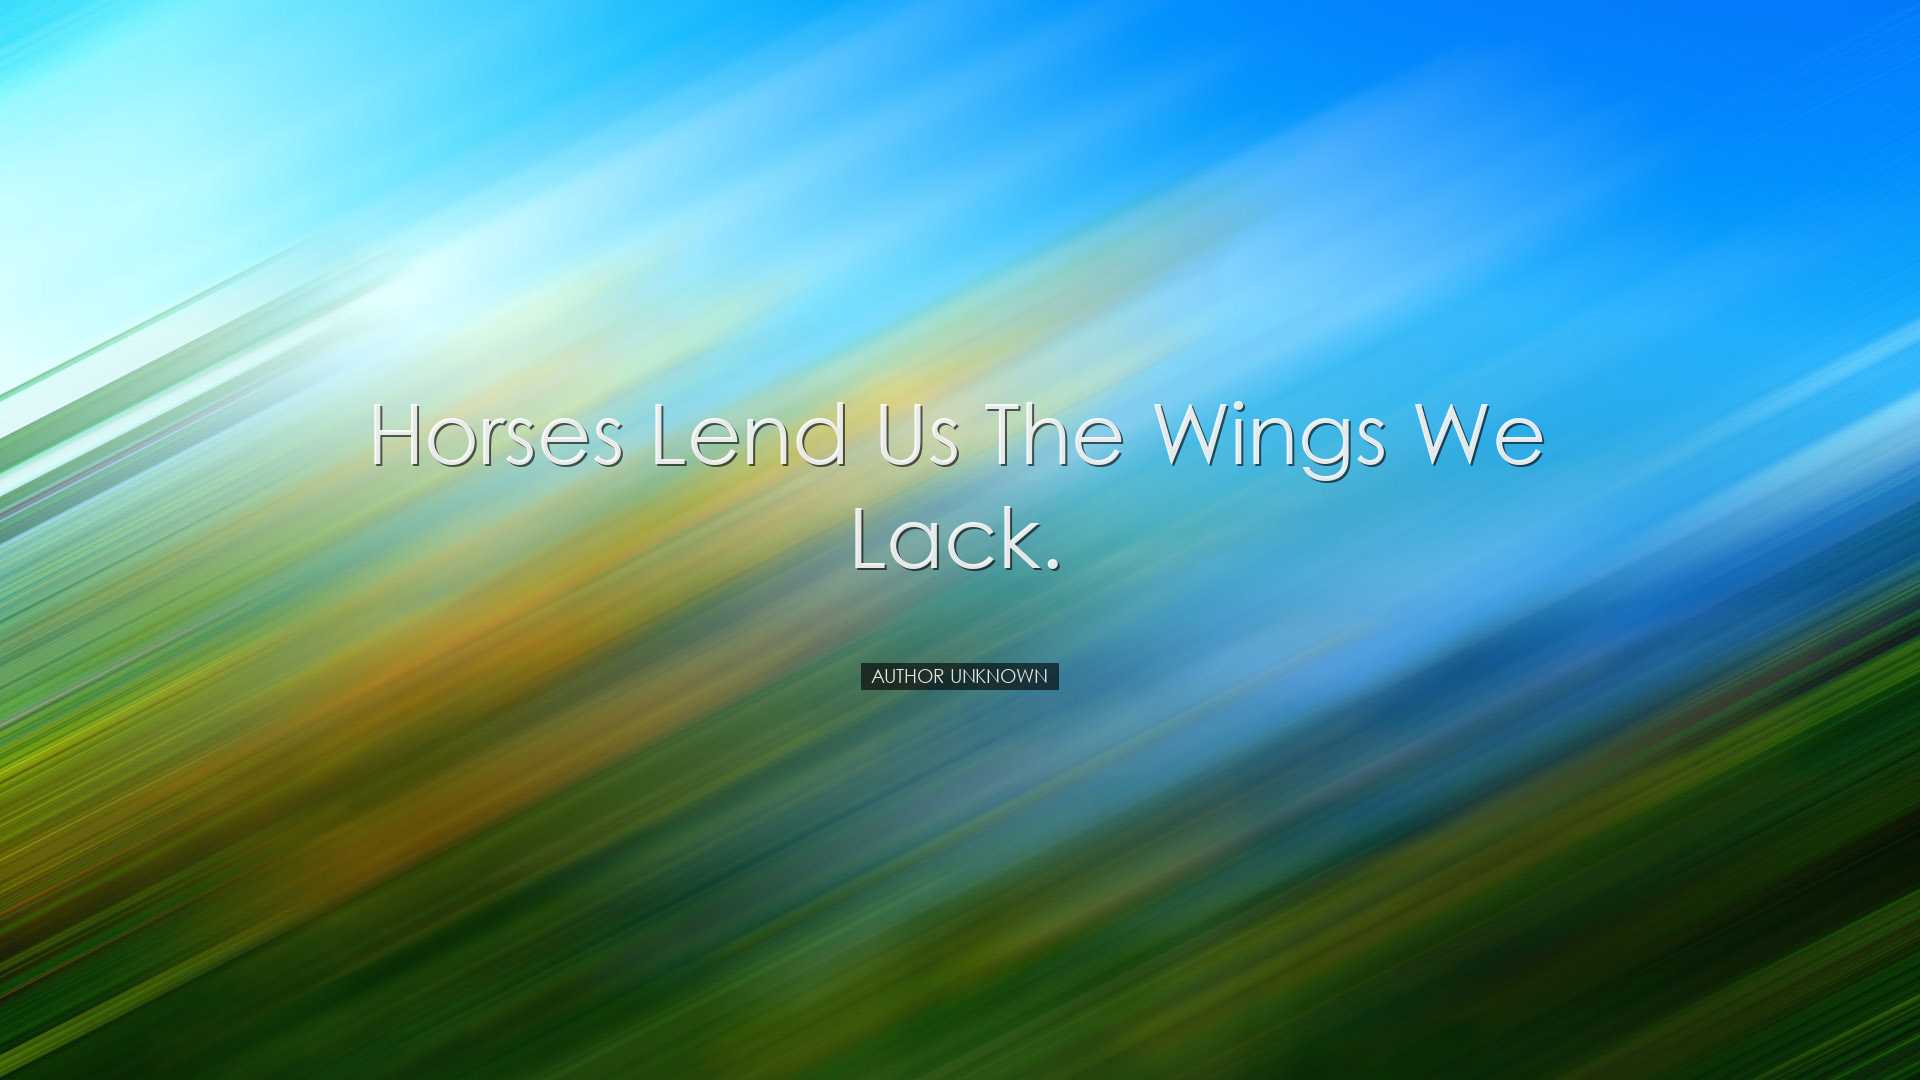 Horses lend us the wings we lack. - Author Unknown